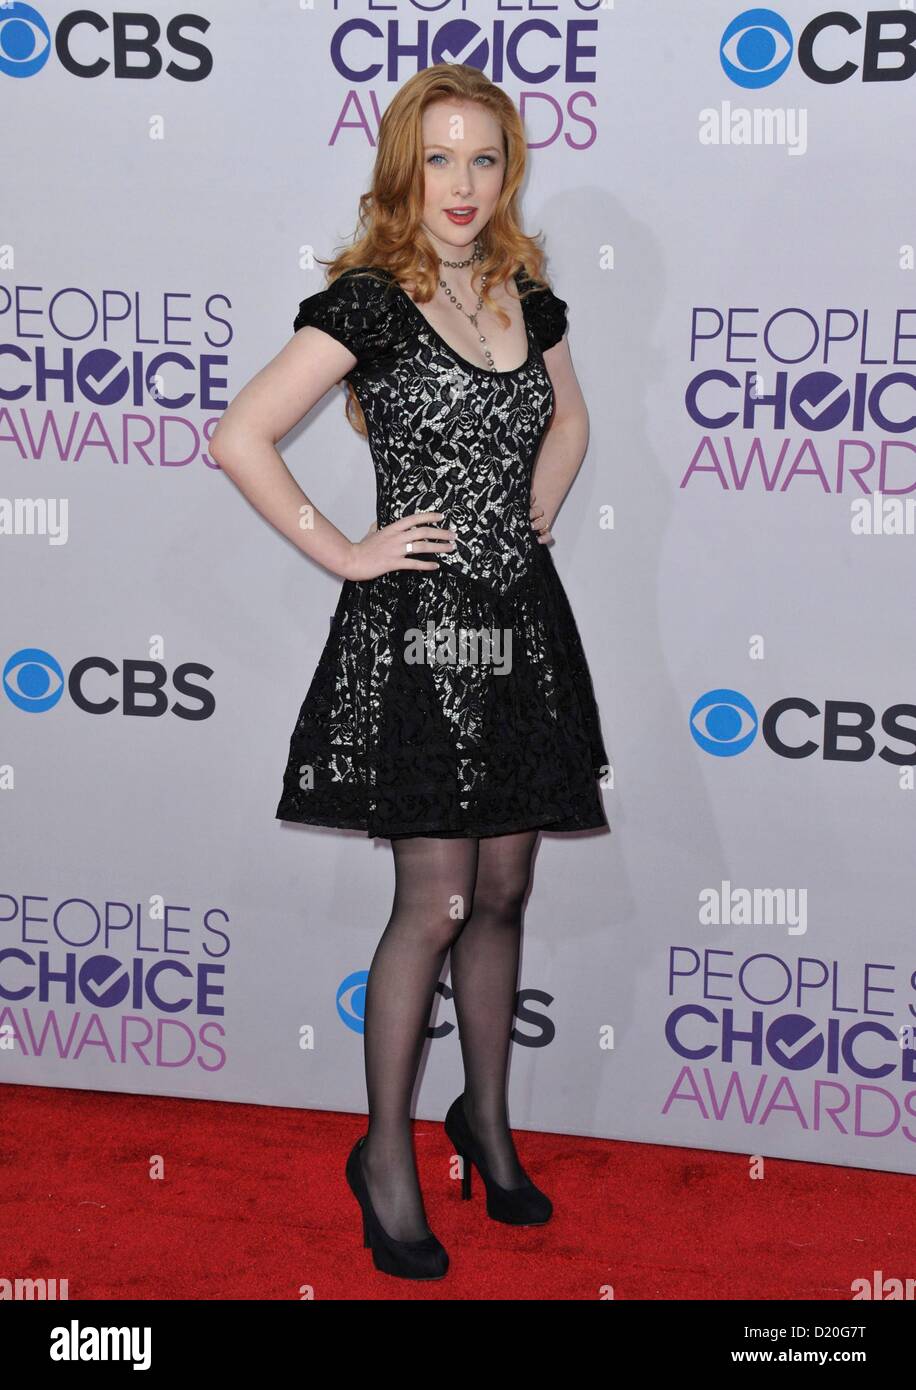 Molly C. Quinn at arrivals for The 39th Annual People's Choice Awards - ARRIVALS, Nokia Theatre at L.A. LIVE, Los Angeles, CA January 9, 2013. Photo By: Dee Cercone/Everett Collection Stock Photo